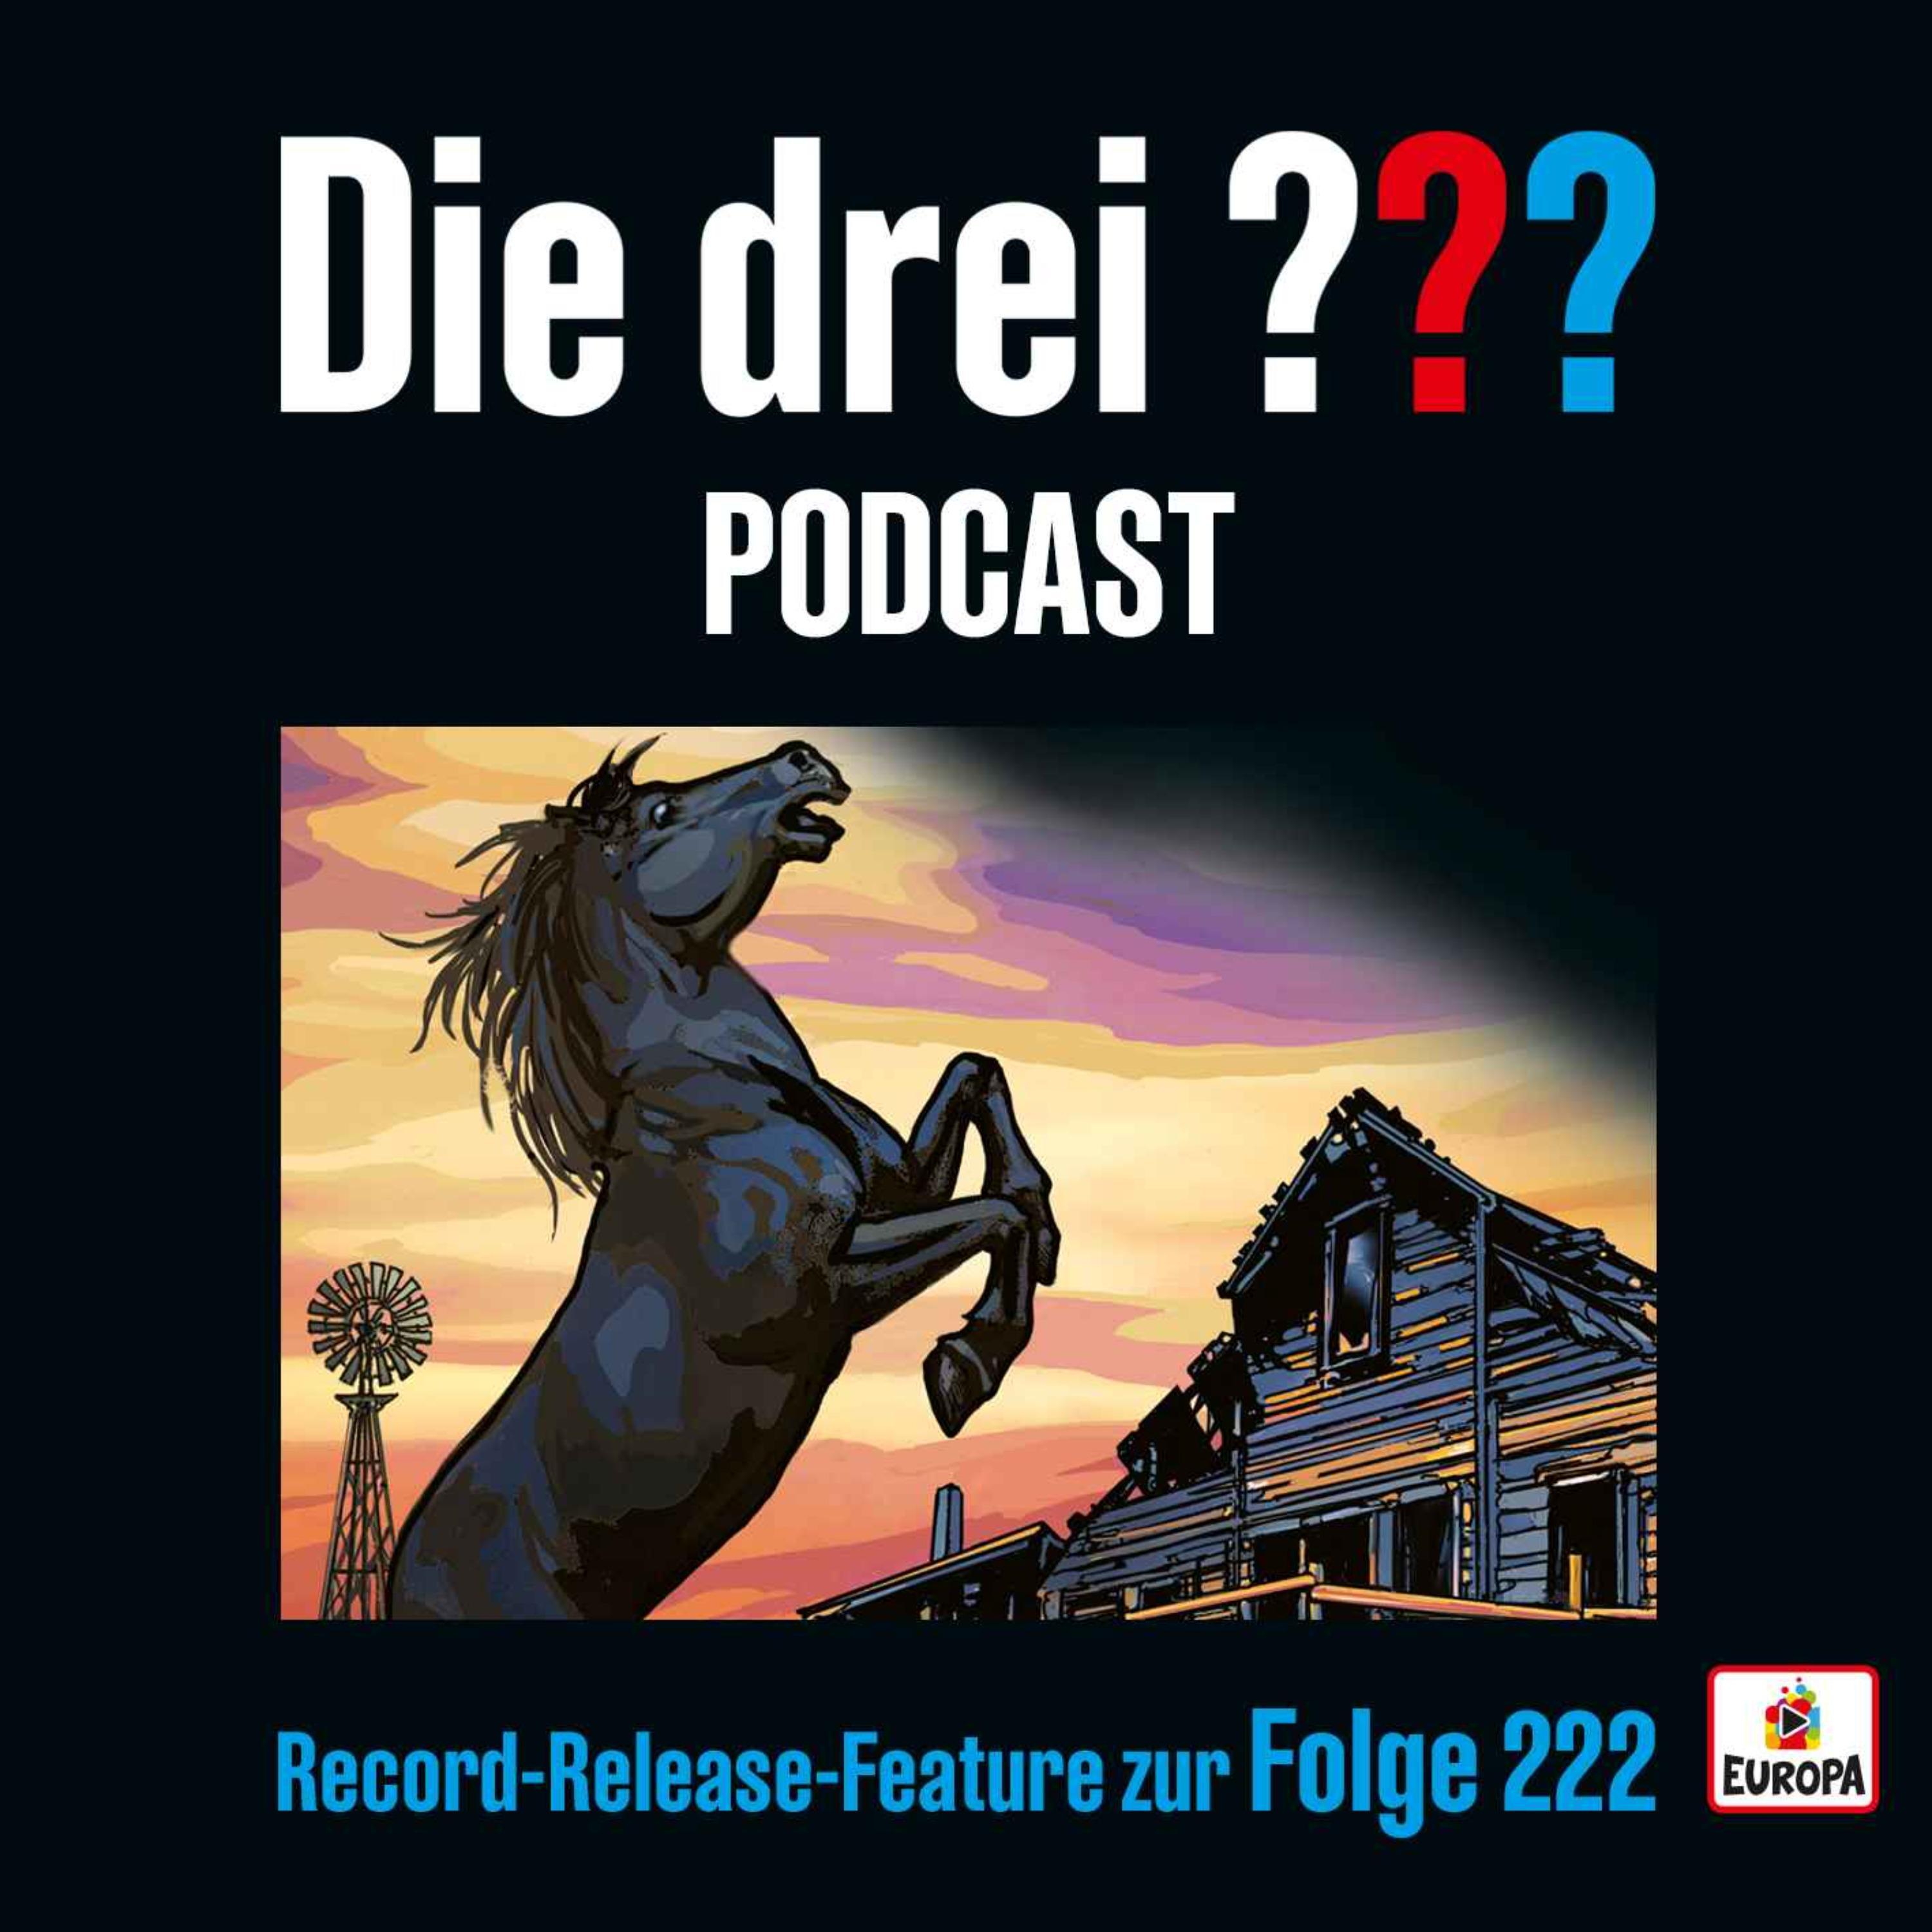 Record-Release-Feature  zur Folge 222